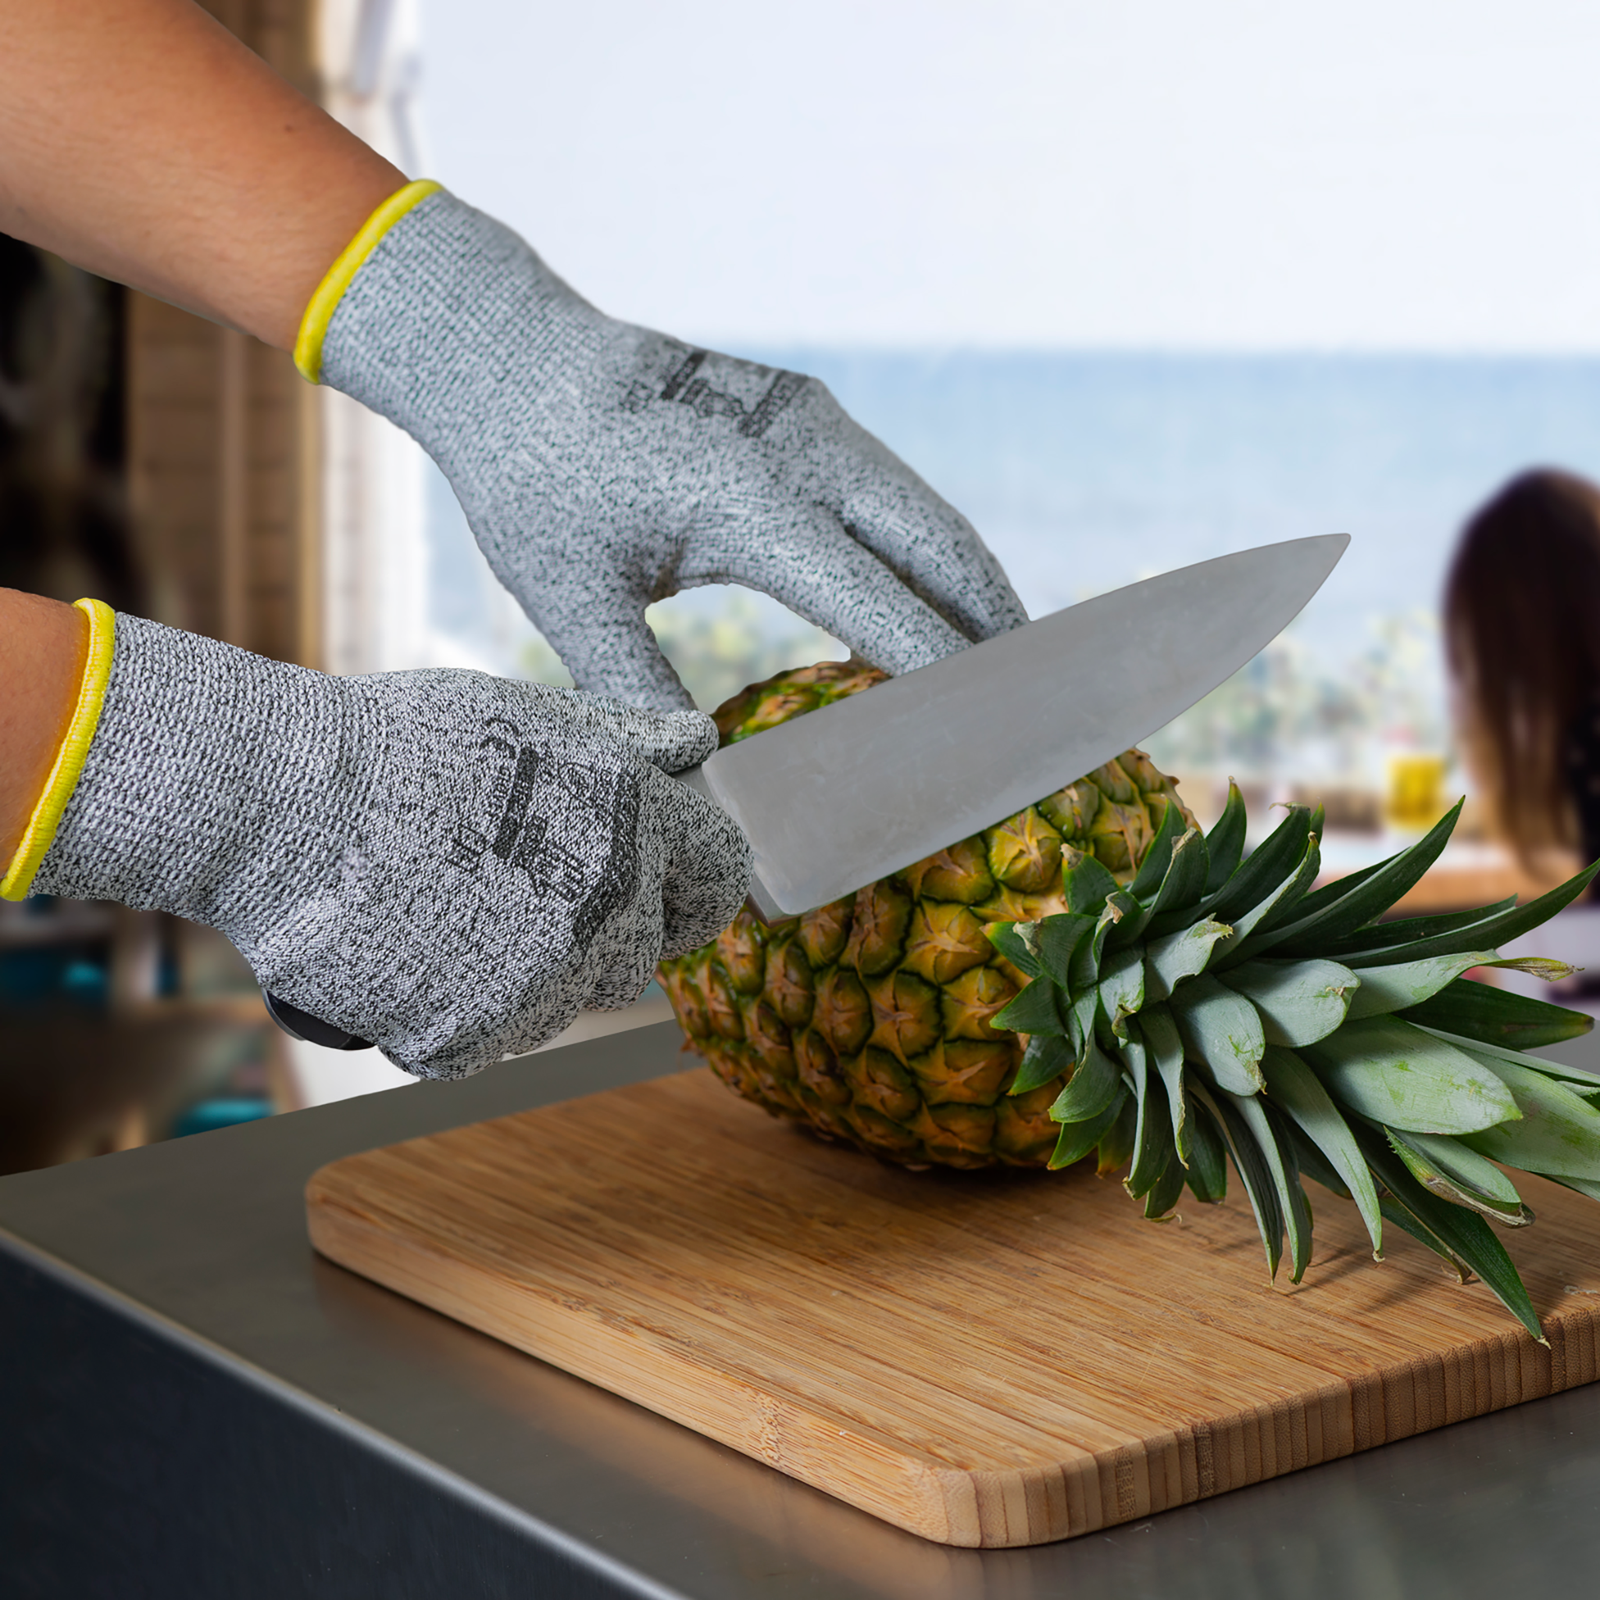 Person wearing the Jorestech multi purpose safety work glove while holding a chefs knife to cut the crown of a pineapple